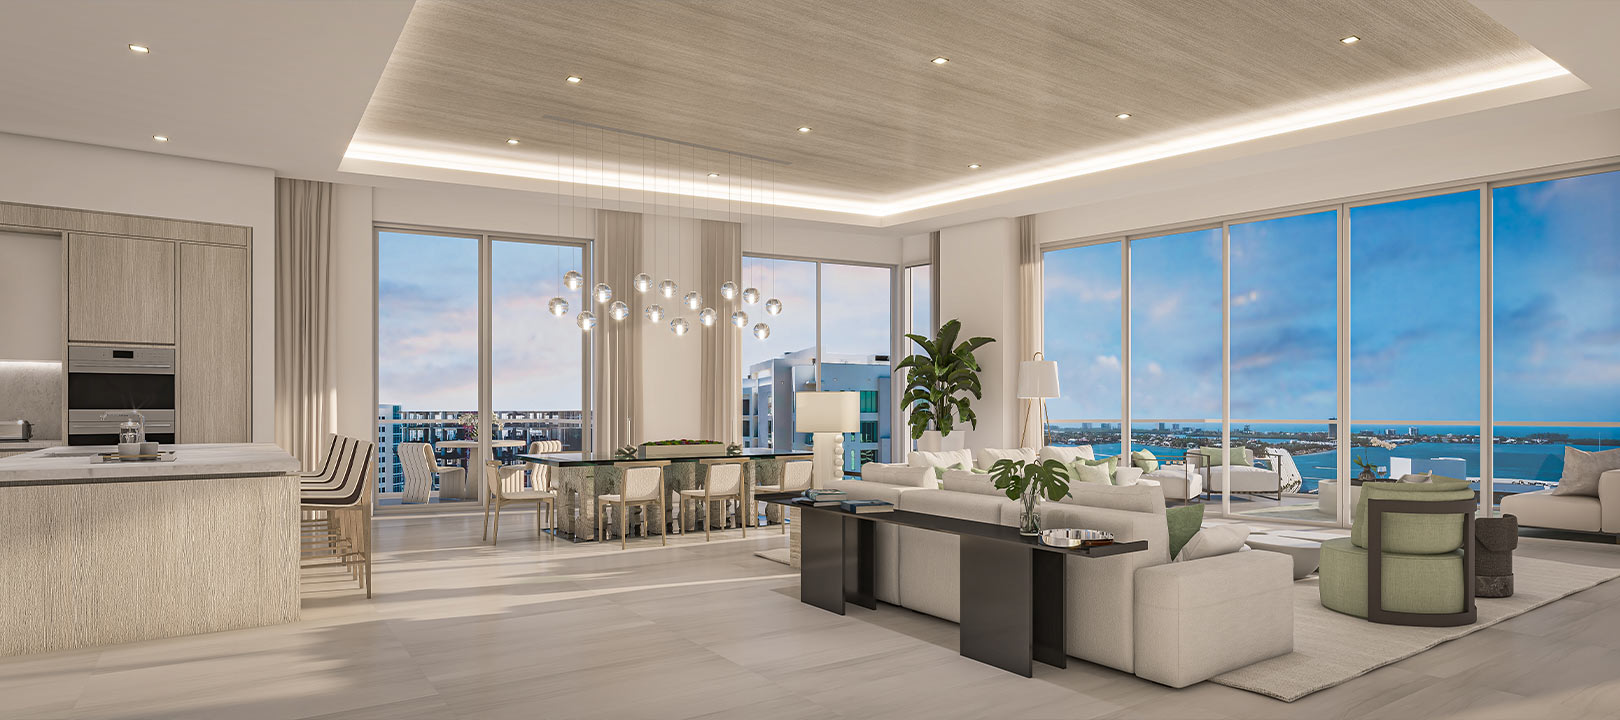 Estate and Penthouse rendering interior